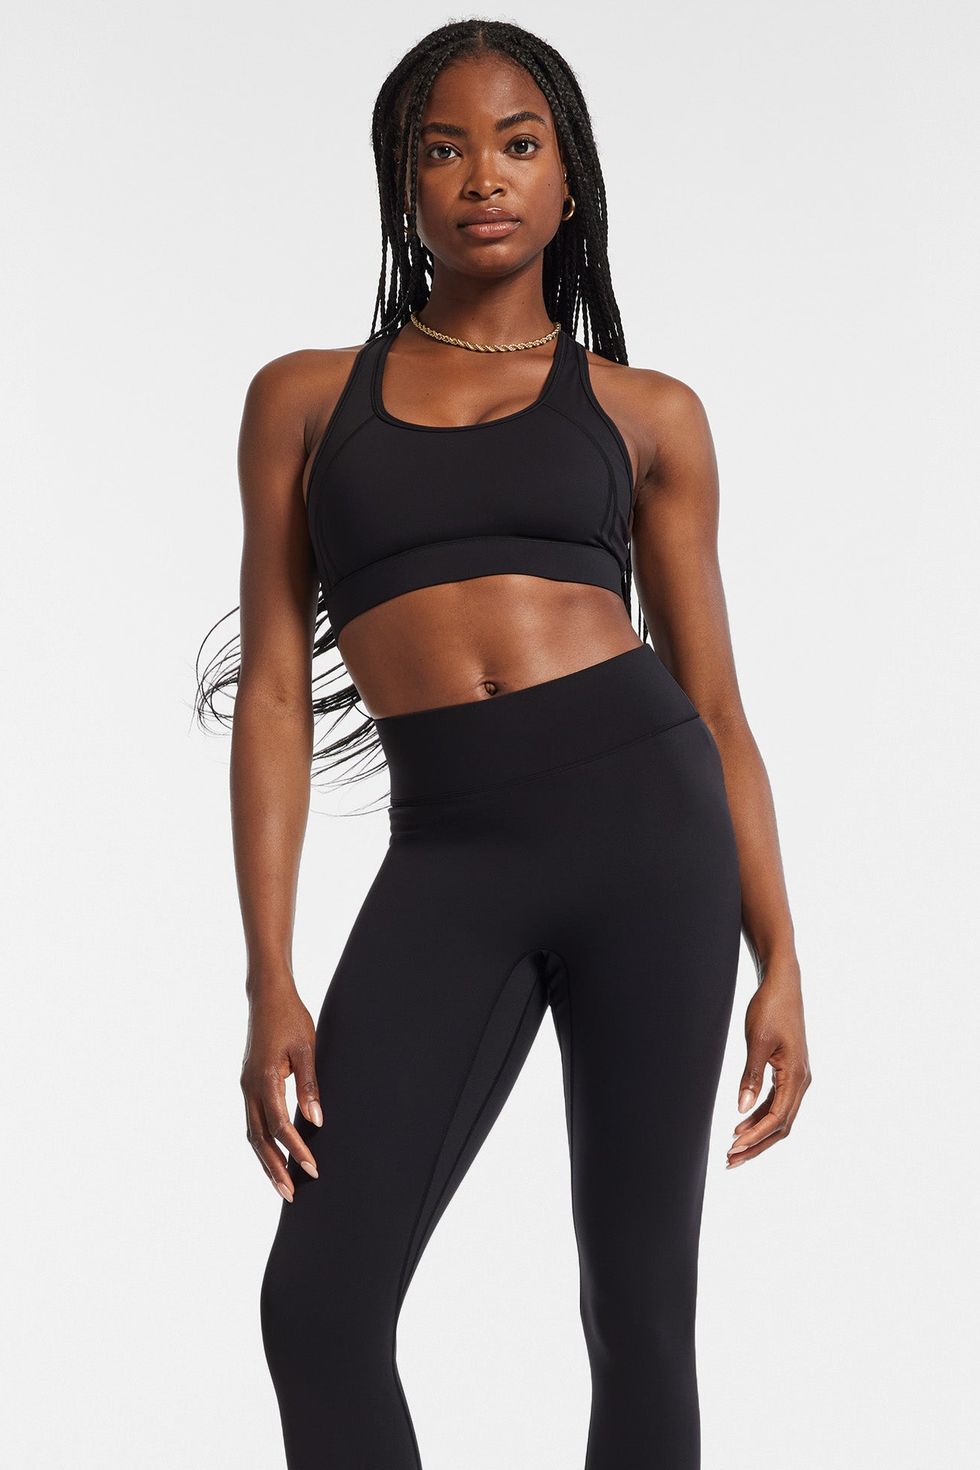 Sometimes you just want to wear black leggings :-) Invigorate 25 in Black ( 6). Swiftly Tech LS in Lavender Dew (8, ✂️). Free to be Serene in Highlight  Orange (4) : r/lululemon